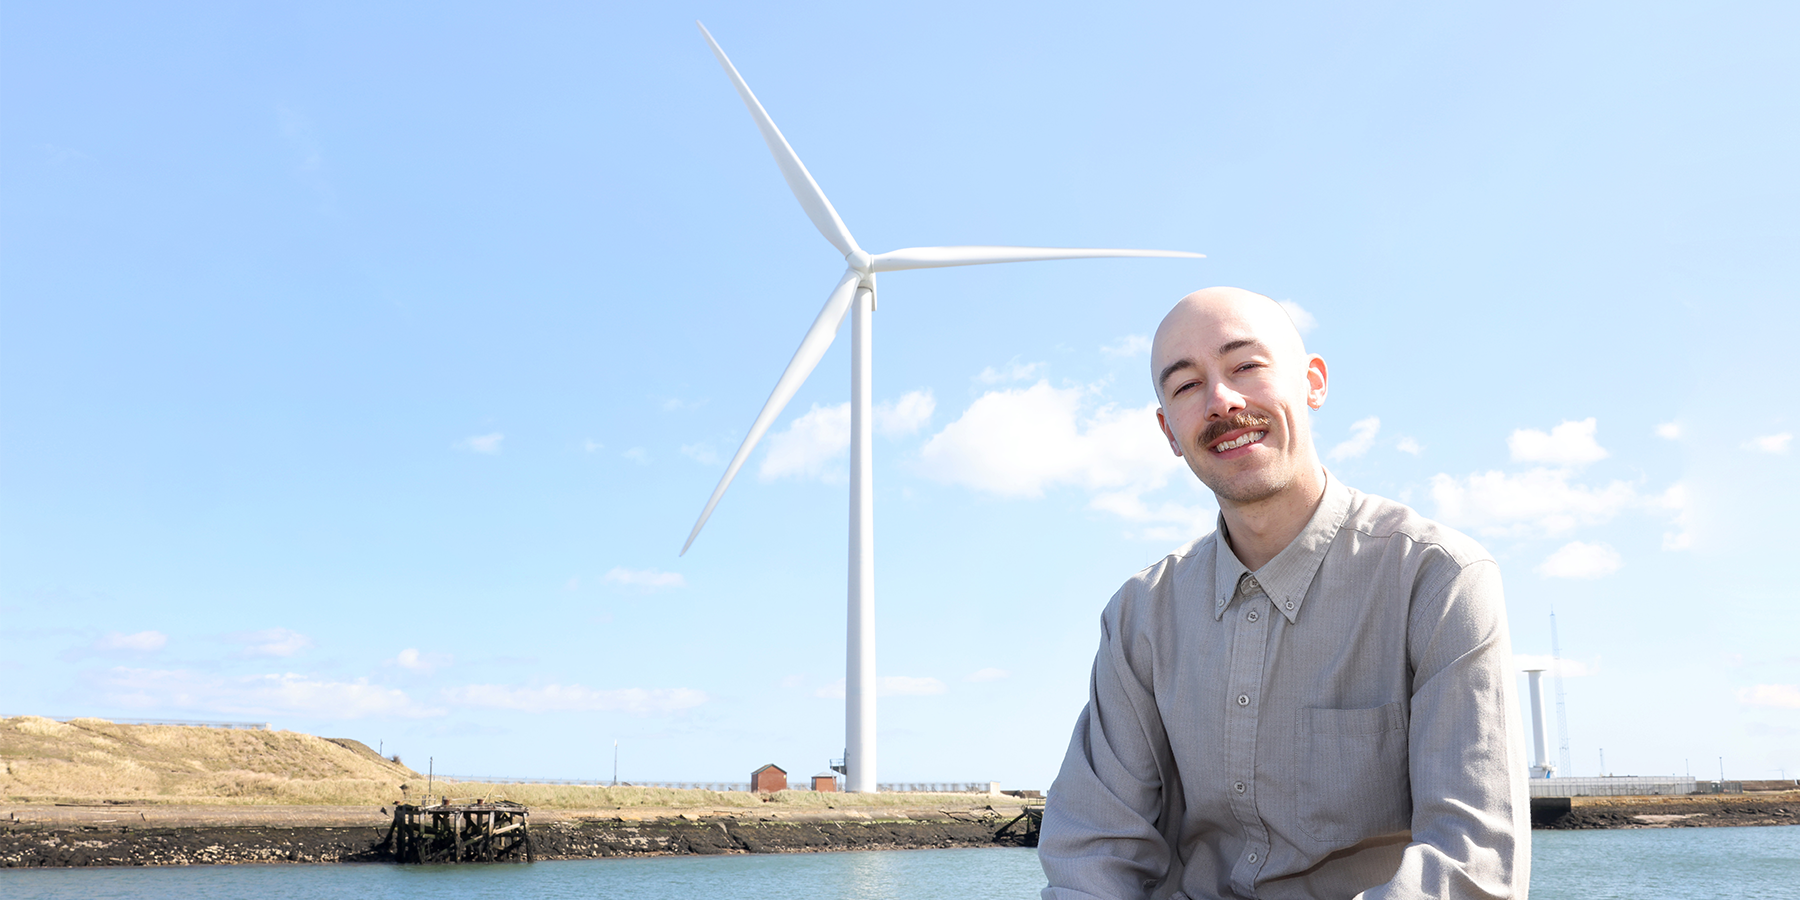 Image of Steven Ziolkowski sitting in front of a wind turbine on a sunny day.